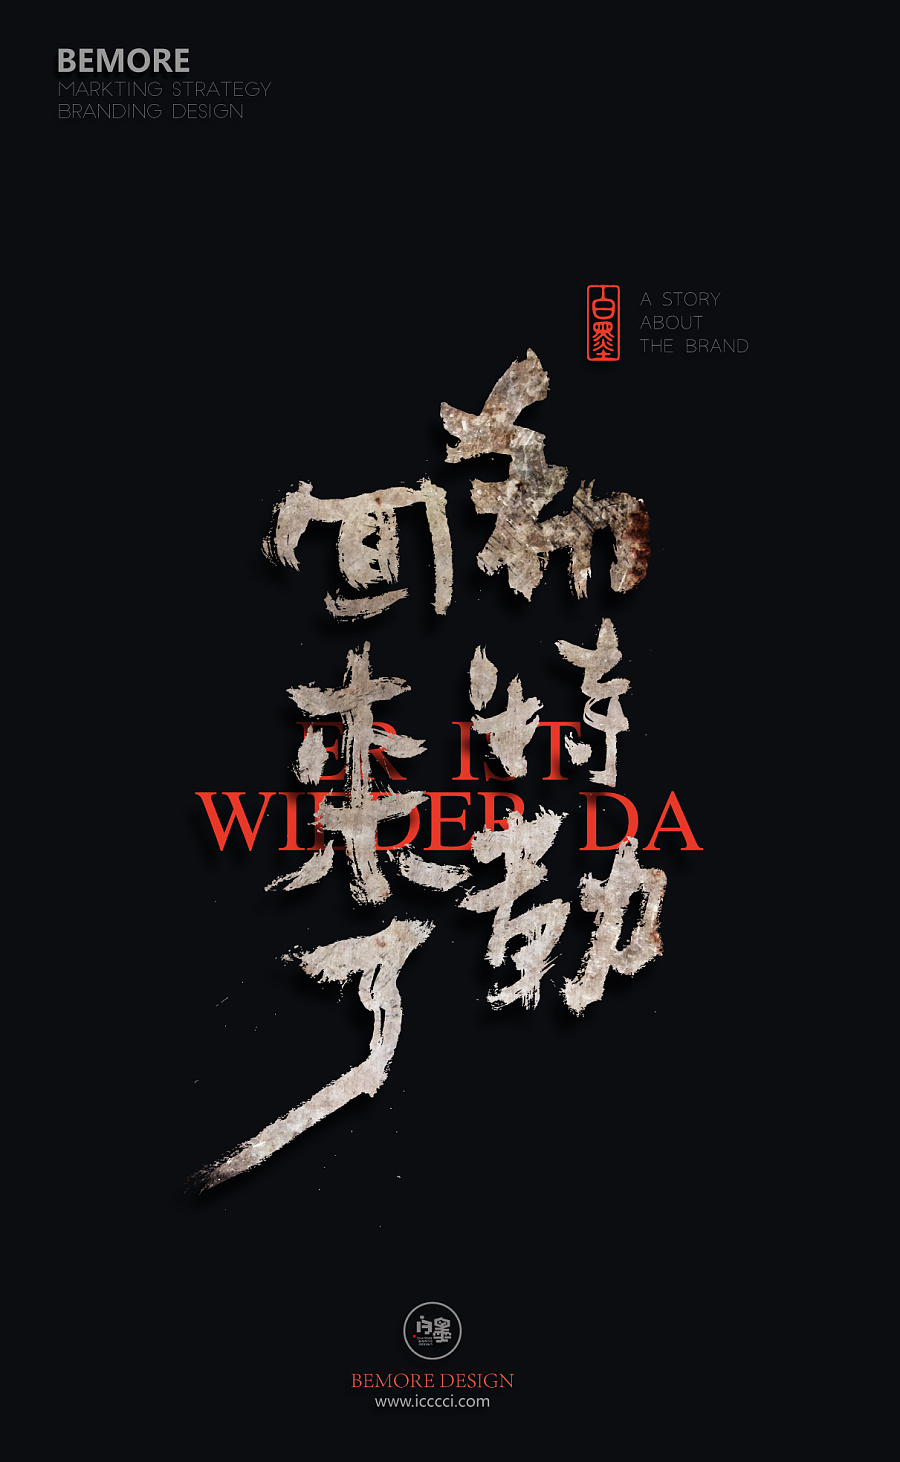 25P Chinese calligraphy font style poster design